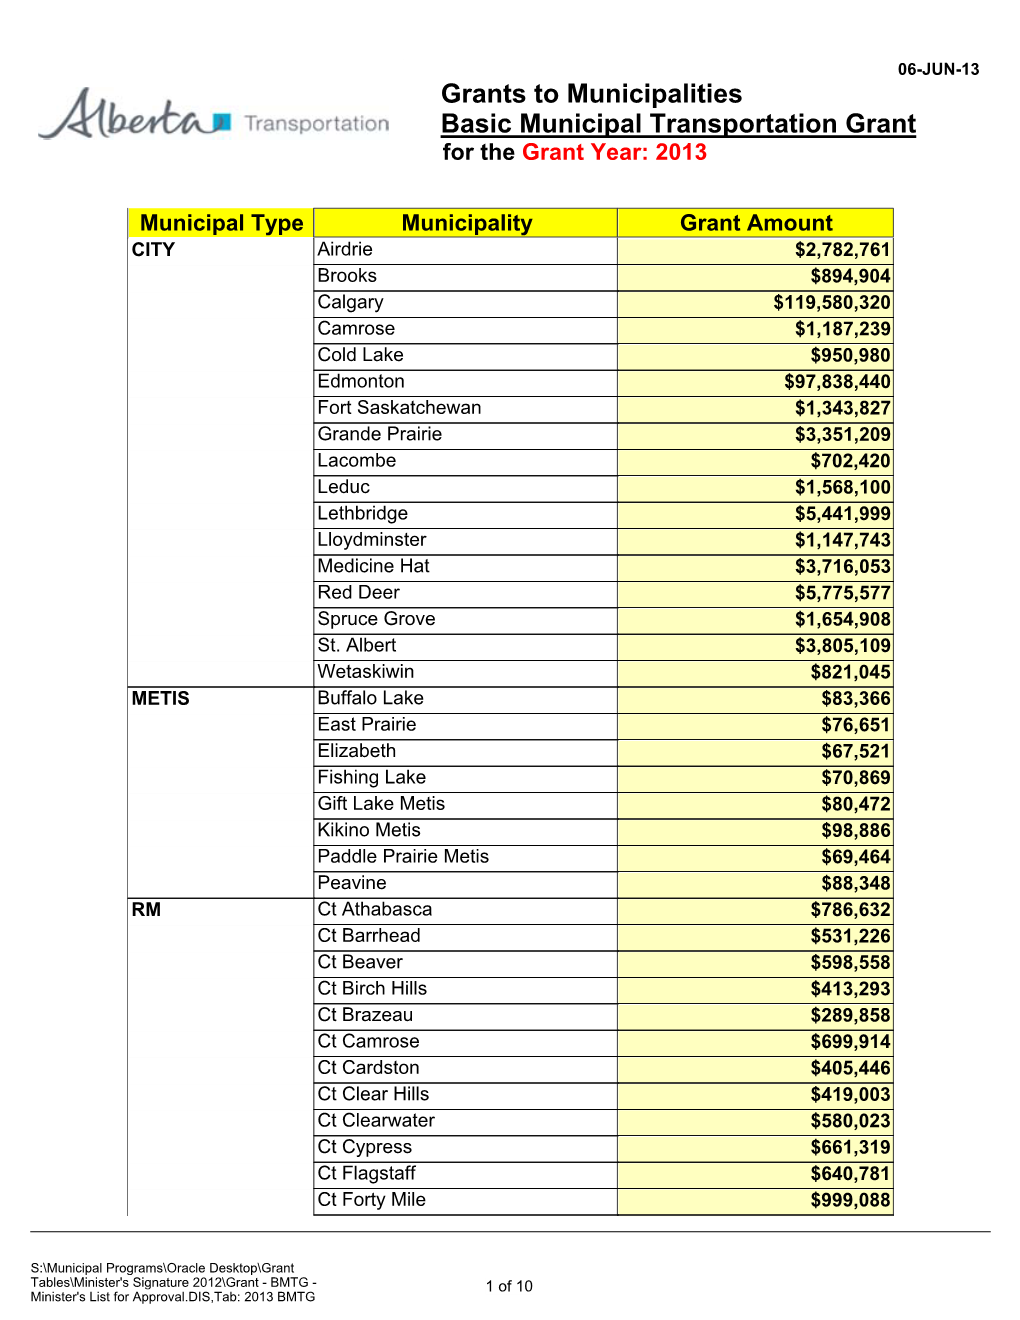 Grants to Municipalities Basic Municipal Transportation Grant for the Grant Year: 2013